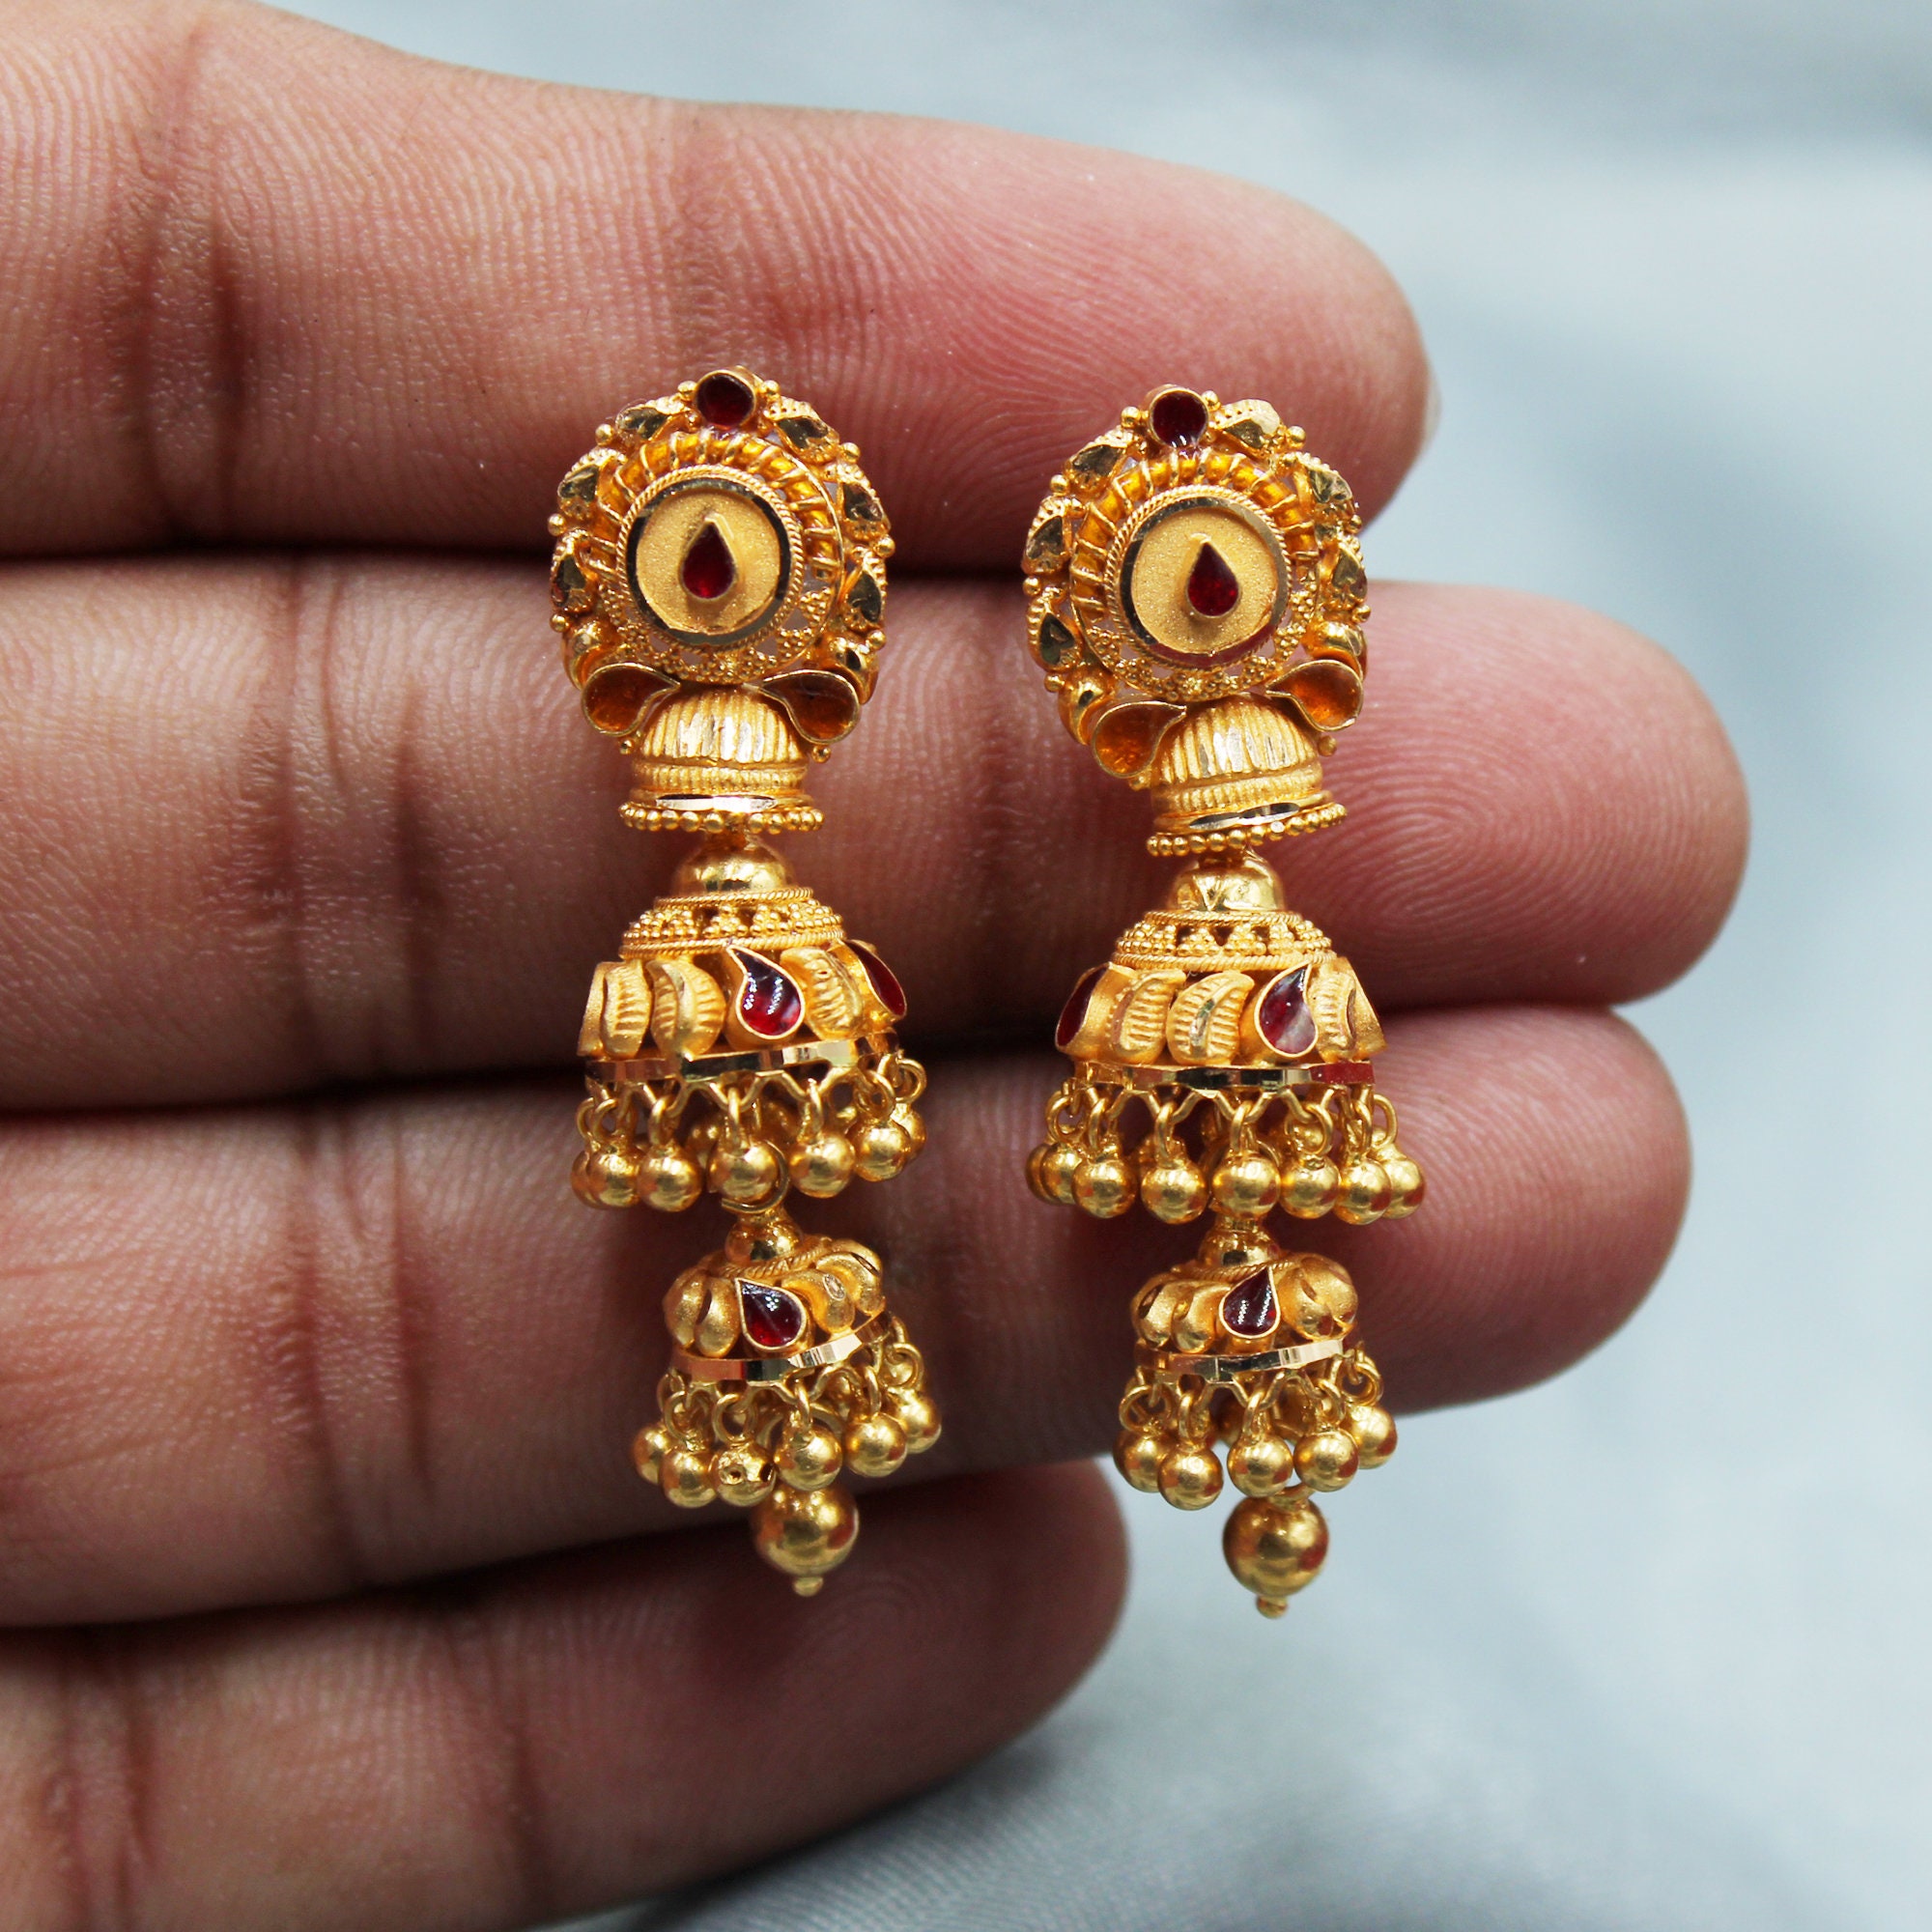 22k Gold Jhumka Earrings in Studded with Pearls handcrafted using Tra